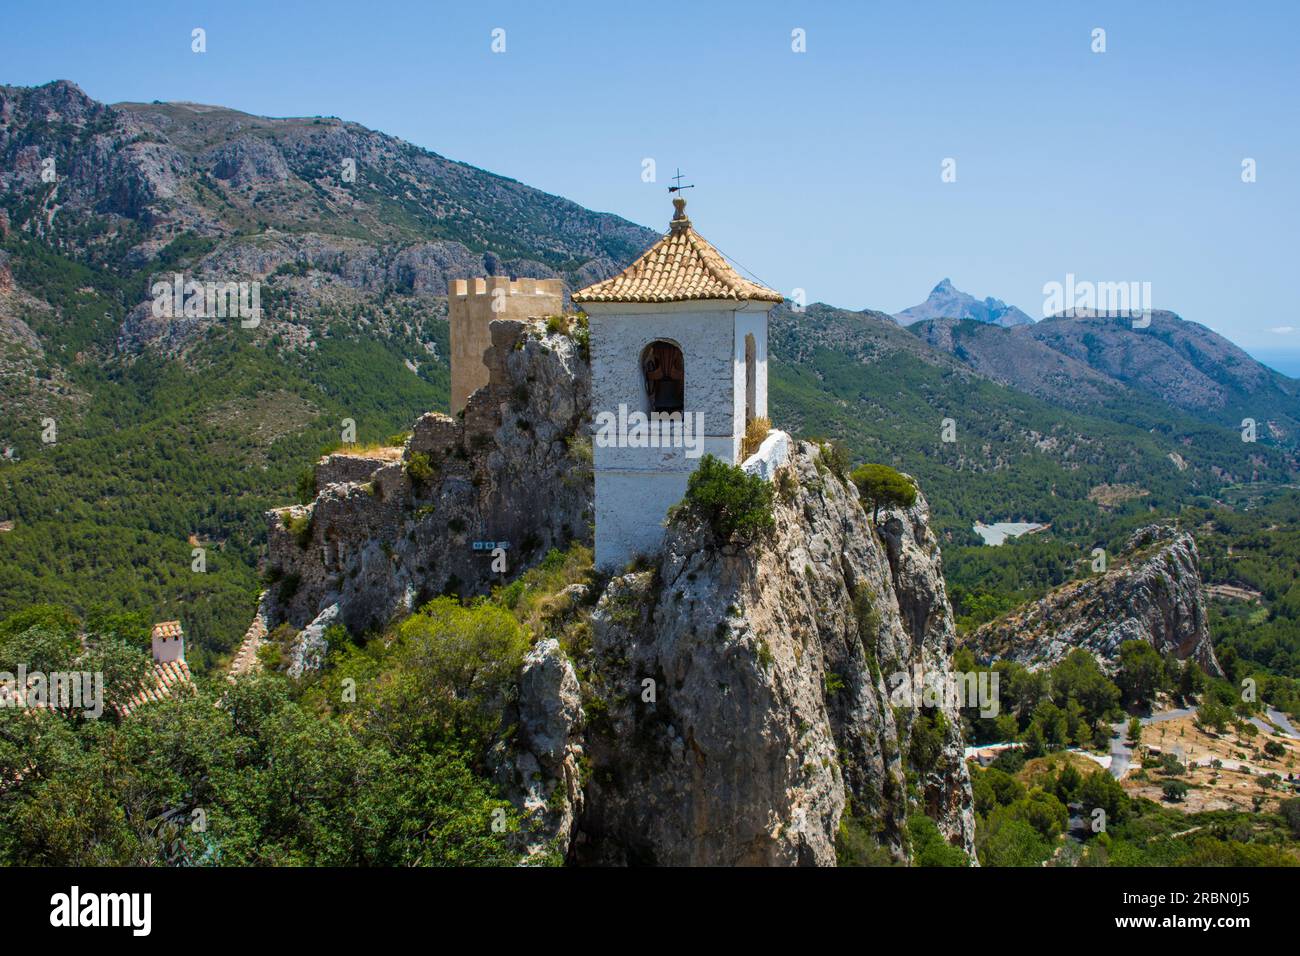 Guadalest hilltop fortress in the Serella mountains is one of the popular holiday destinations on the Costa Blanca, Spain Stock Photo